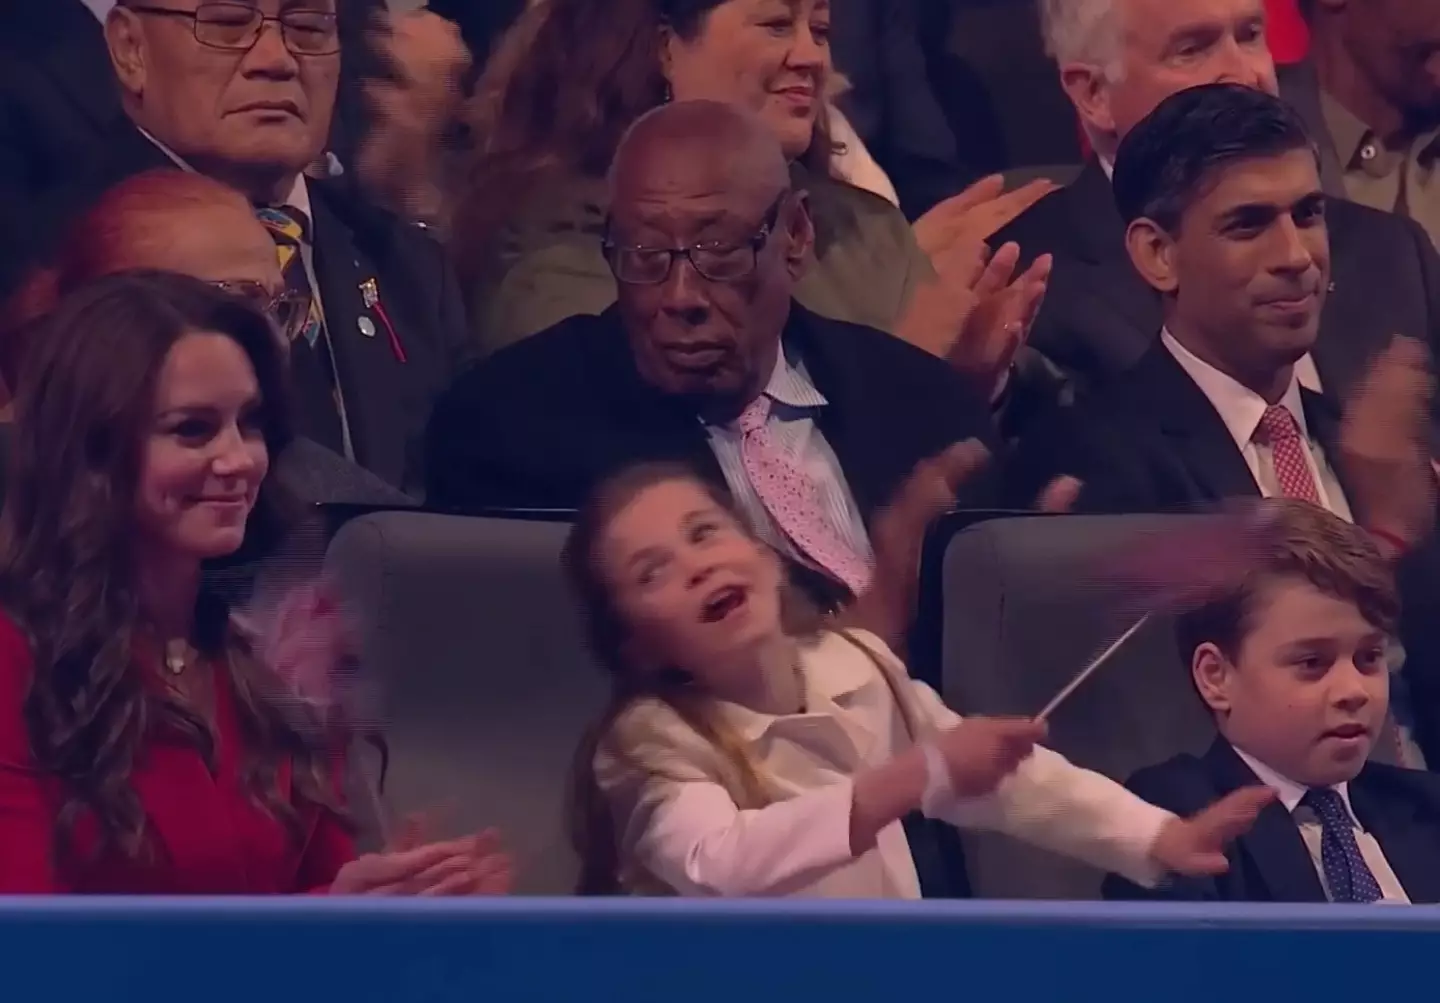 Coronation concert viewers were overjoyed when Princess Charlotte appeared to dab.